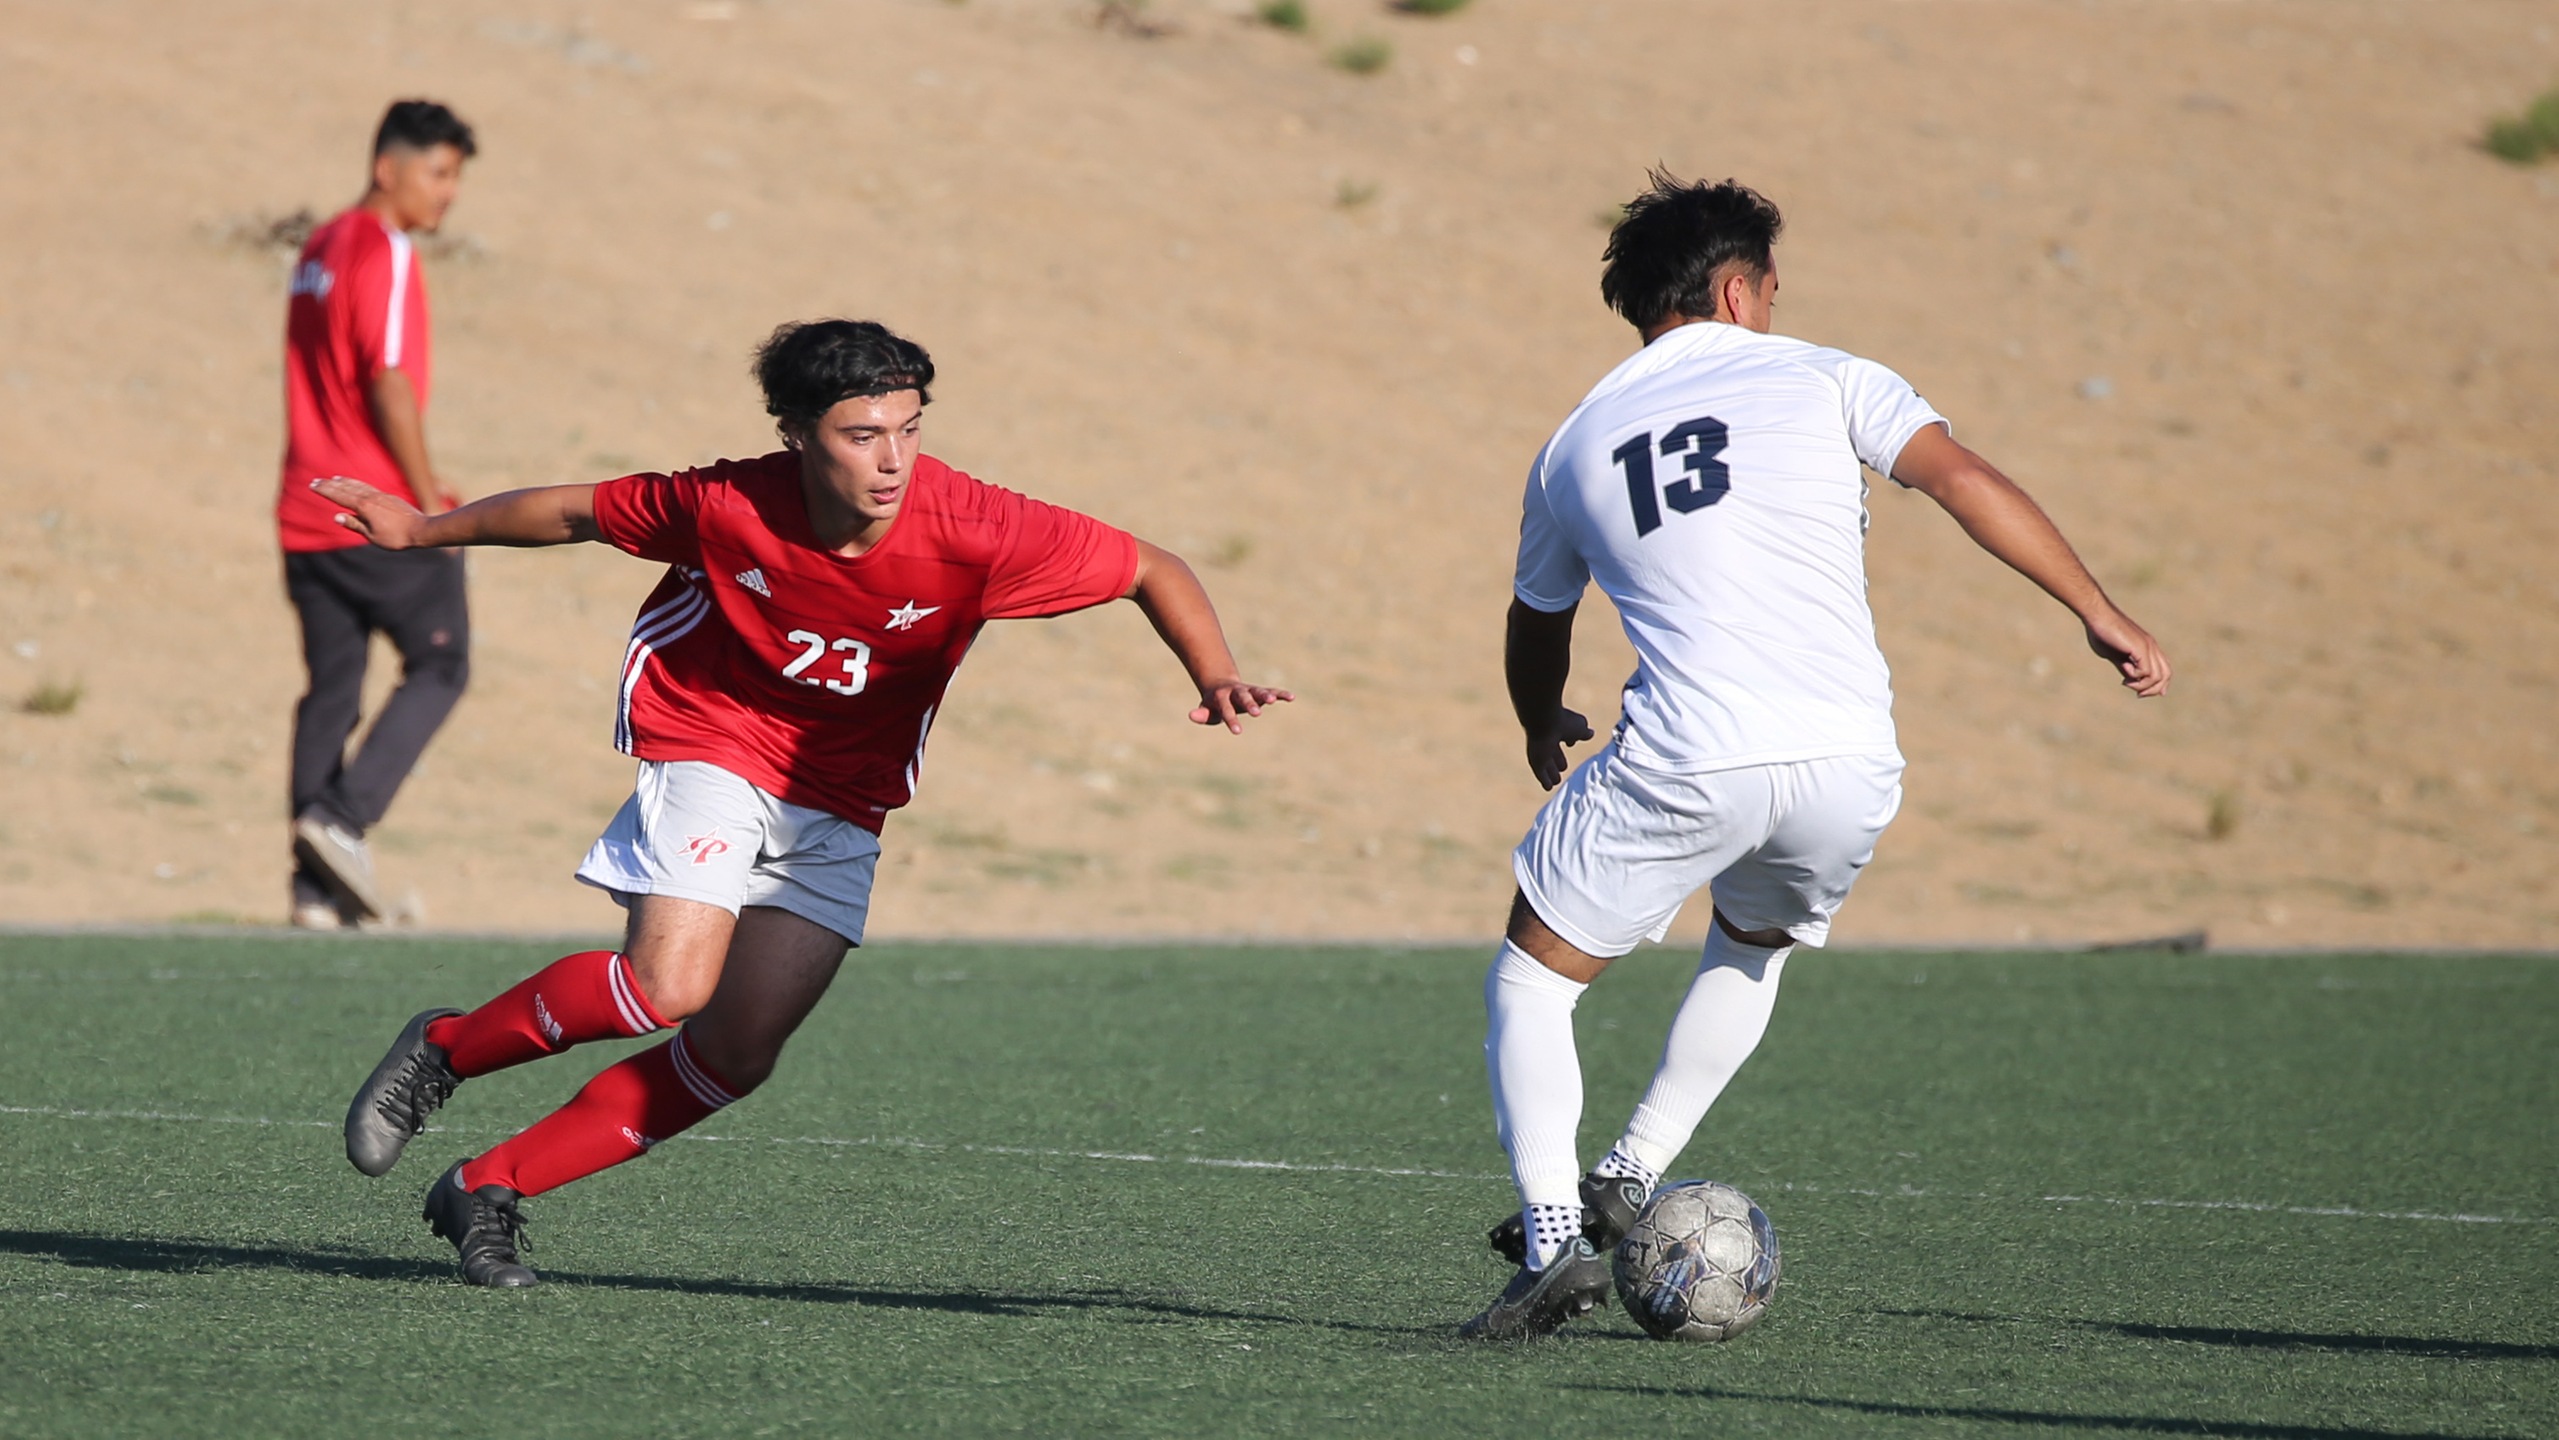 Marius Anquetil had a three-minute hat trick against San Diego City College. Photo by Hugh Cox.